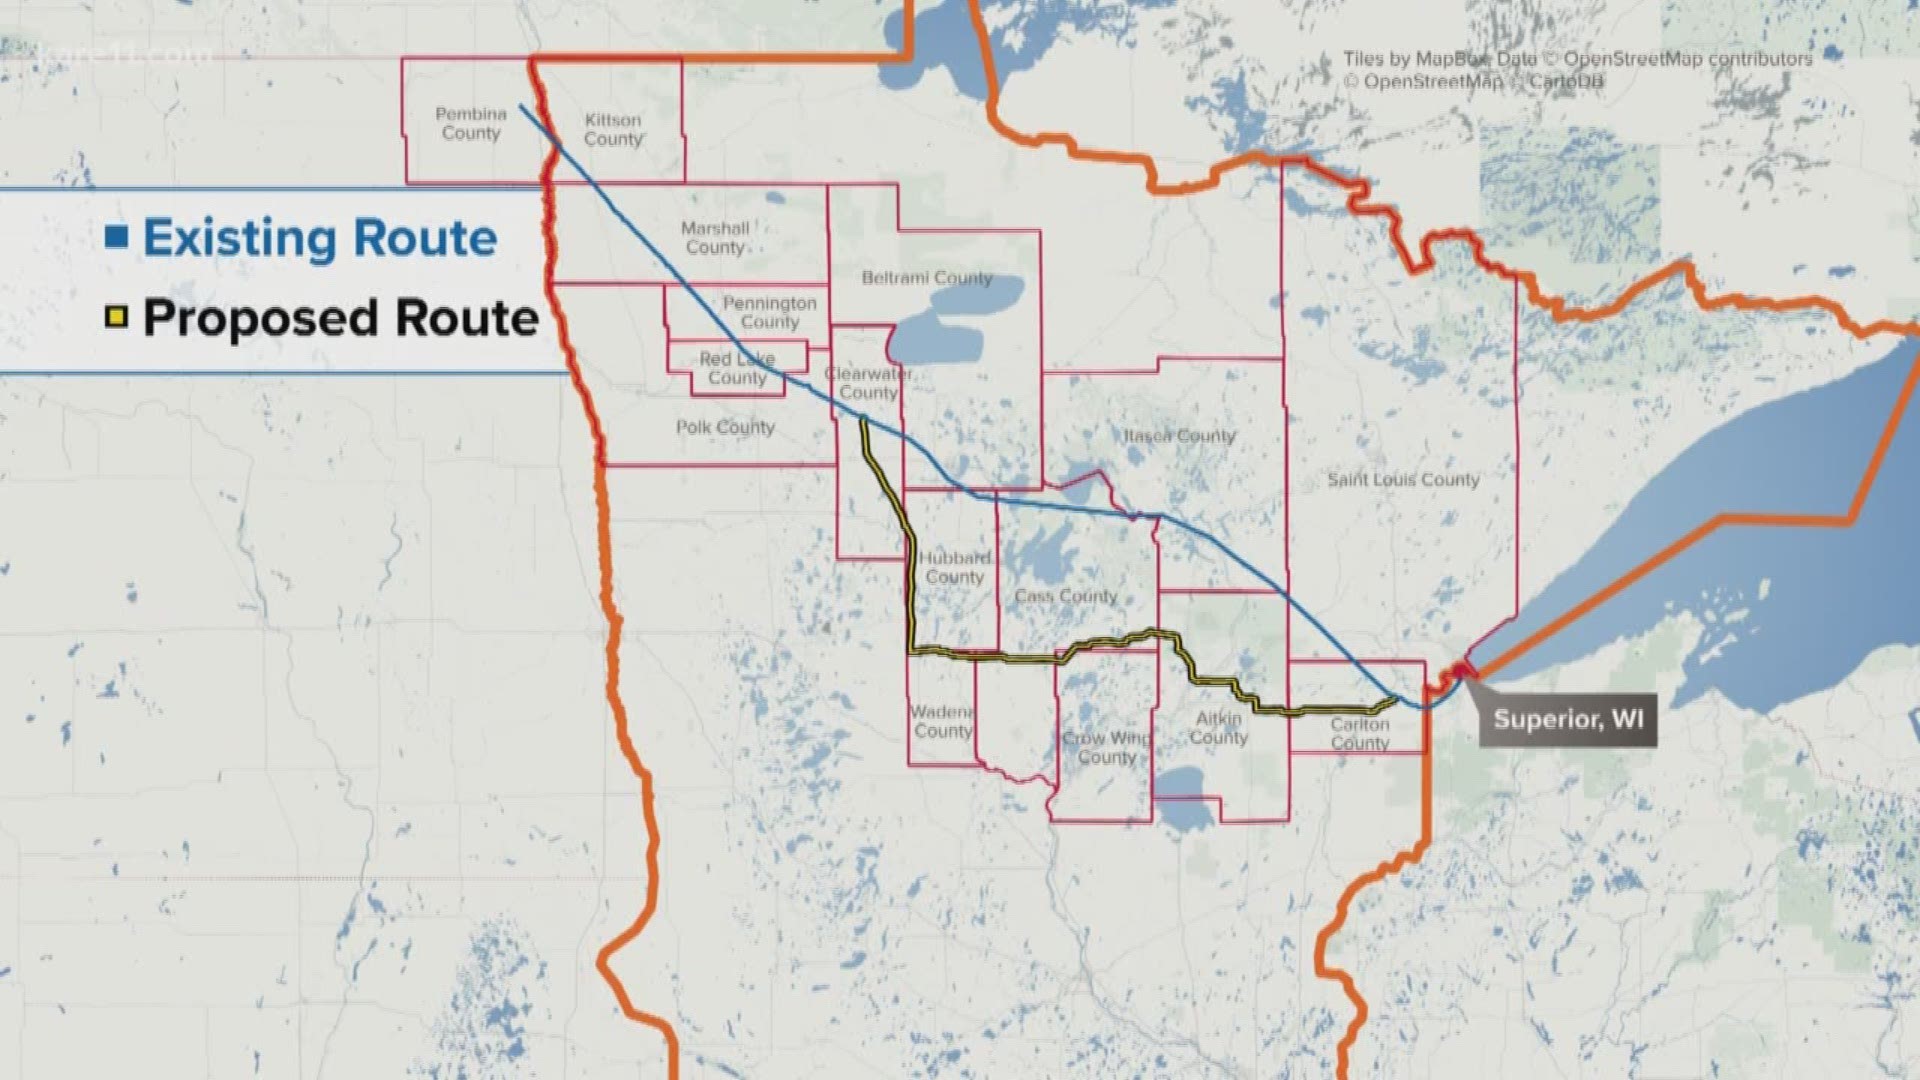 The proposal to build a $2 billion oil pipeline through the heart of Minnesota continued to face scrutiny on Tuesday during ongoing public hearings with the Minnesota Public Utilities Commission, which is expected to issue a decision on the project by the